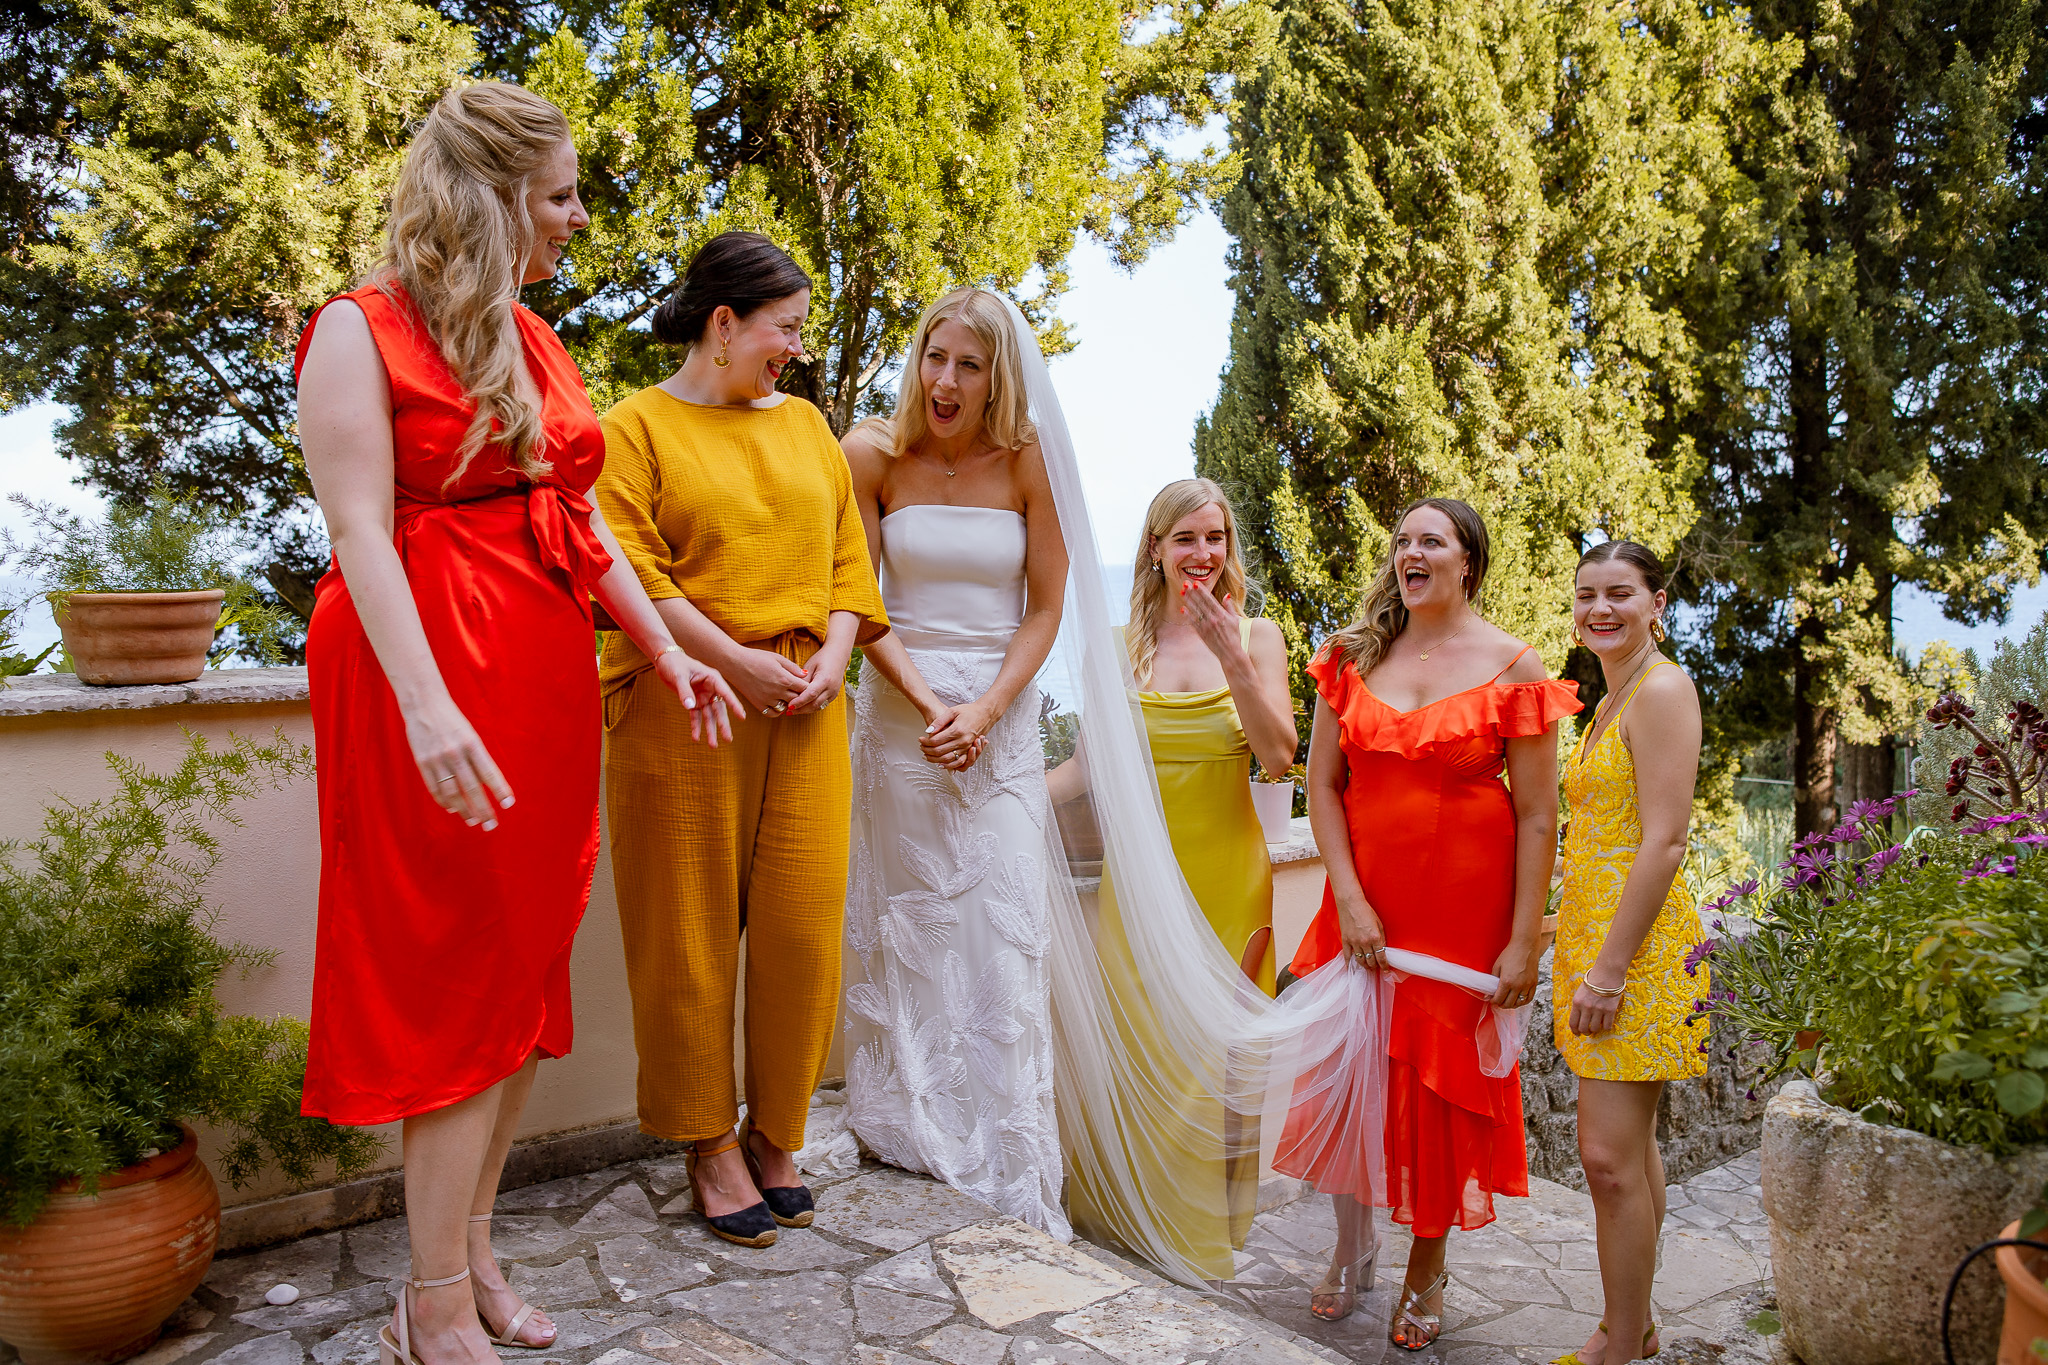 Alice and her bridesmaids are captured in a happy candid moment by Rozewin Photography.